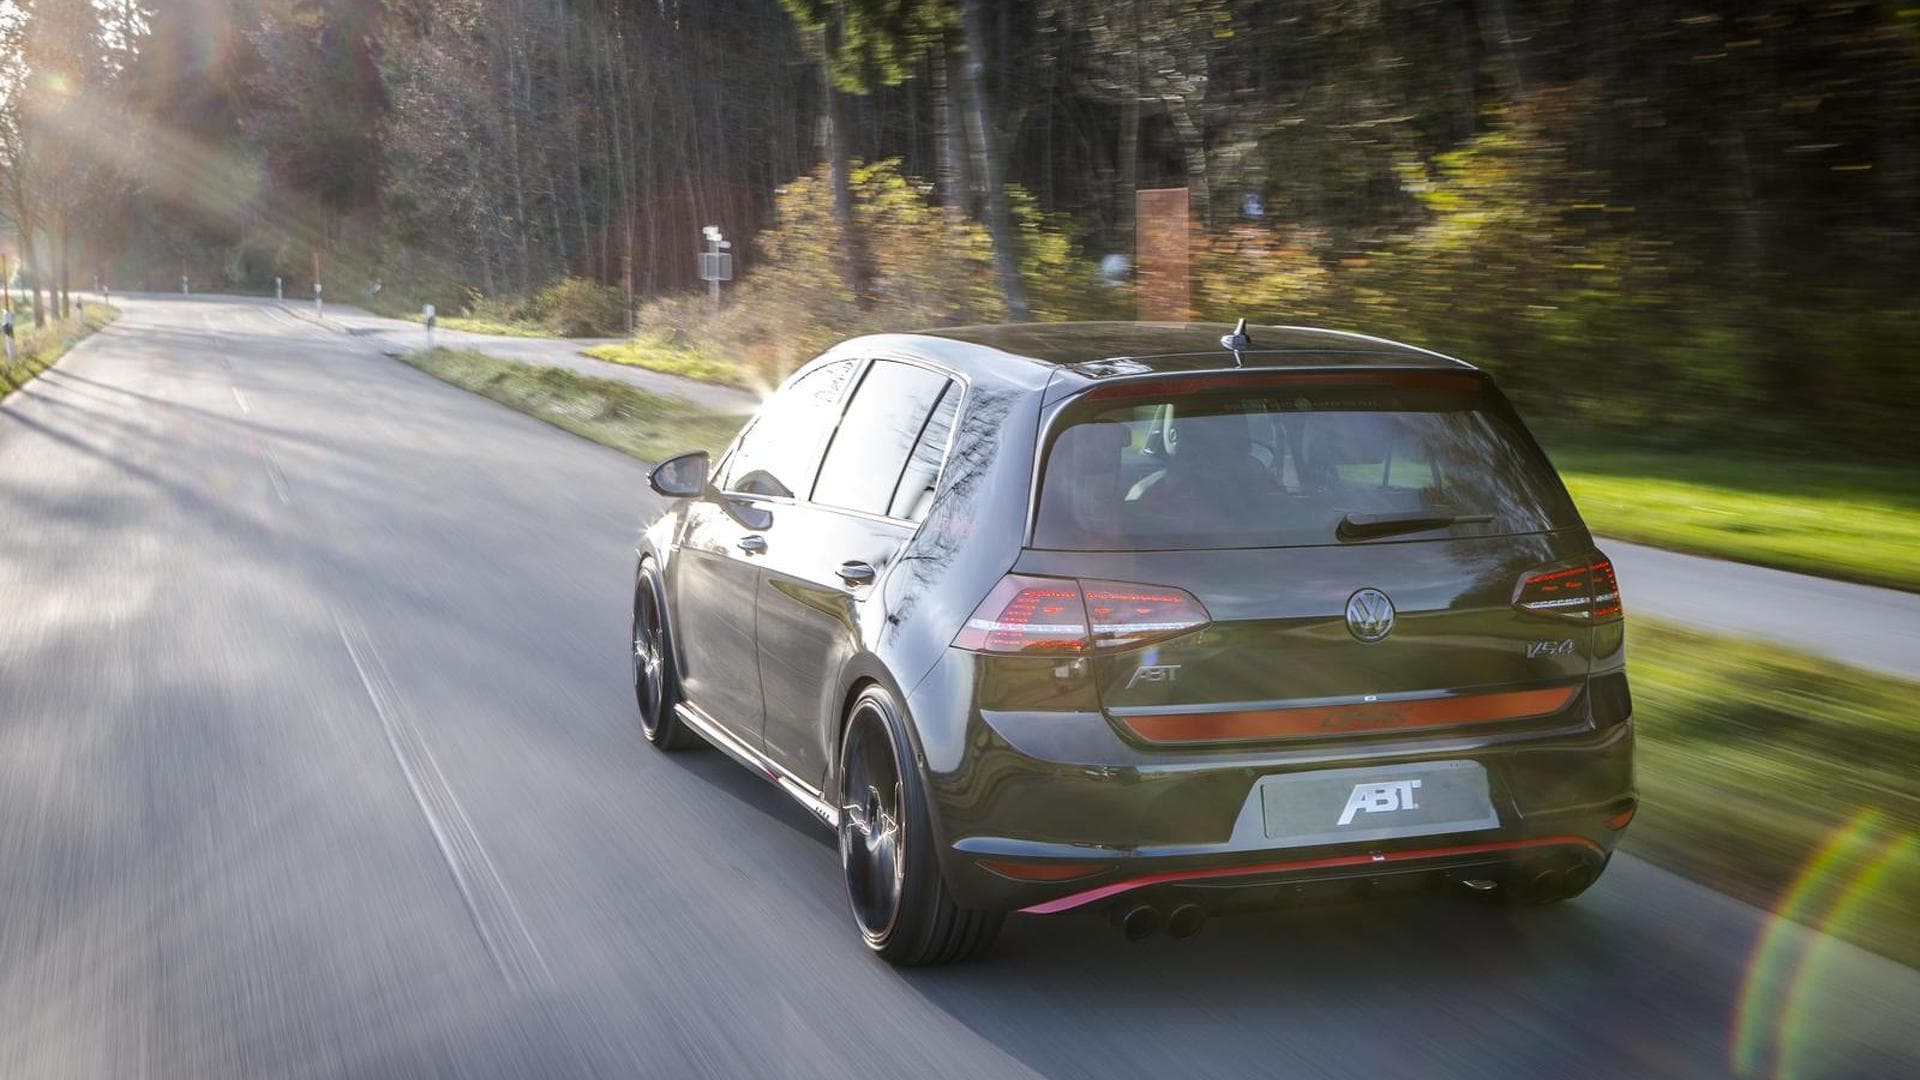 The ABT Golf GTI is a Volkswagen Tuner’s Perfect Car